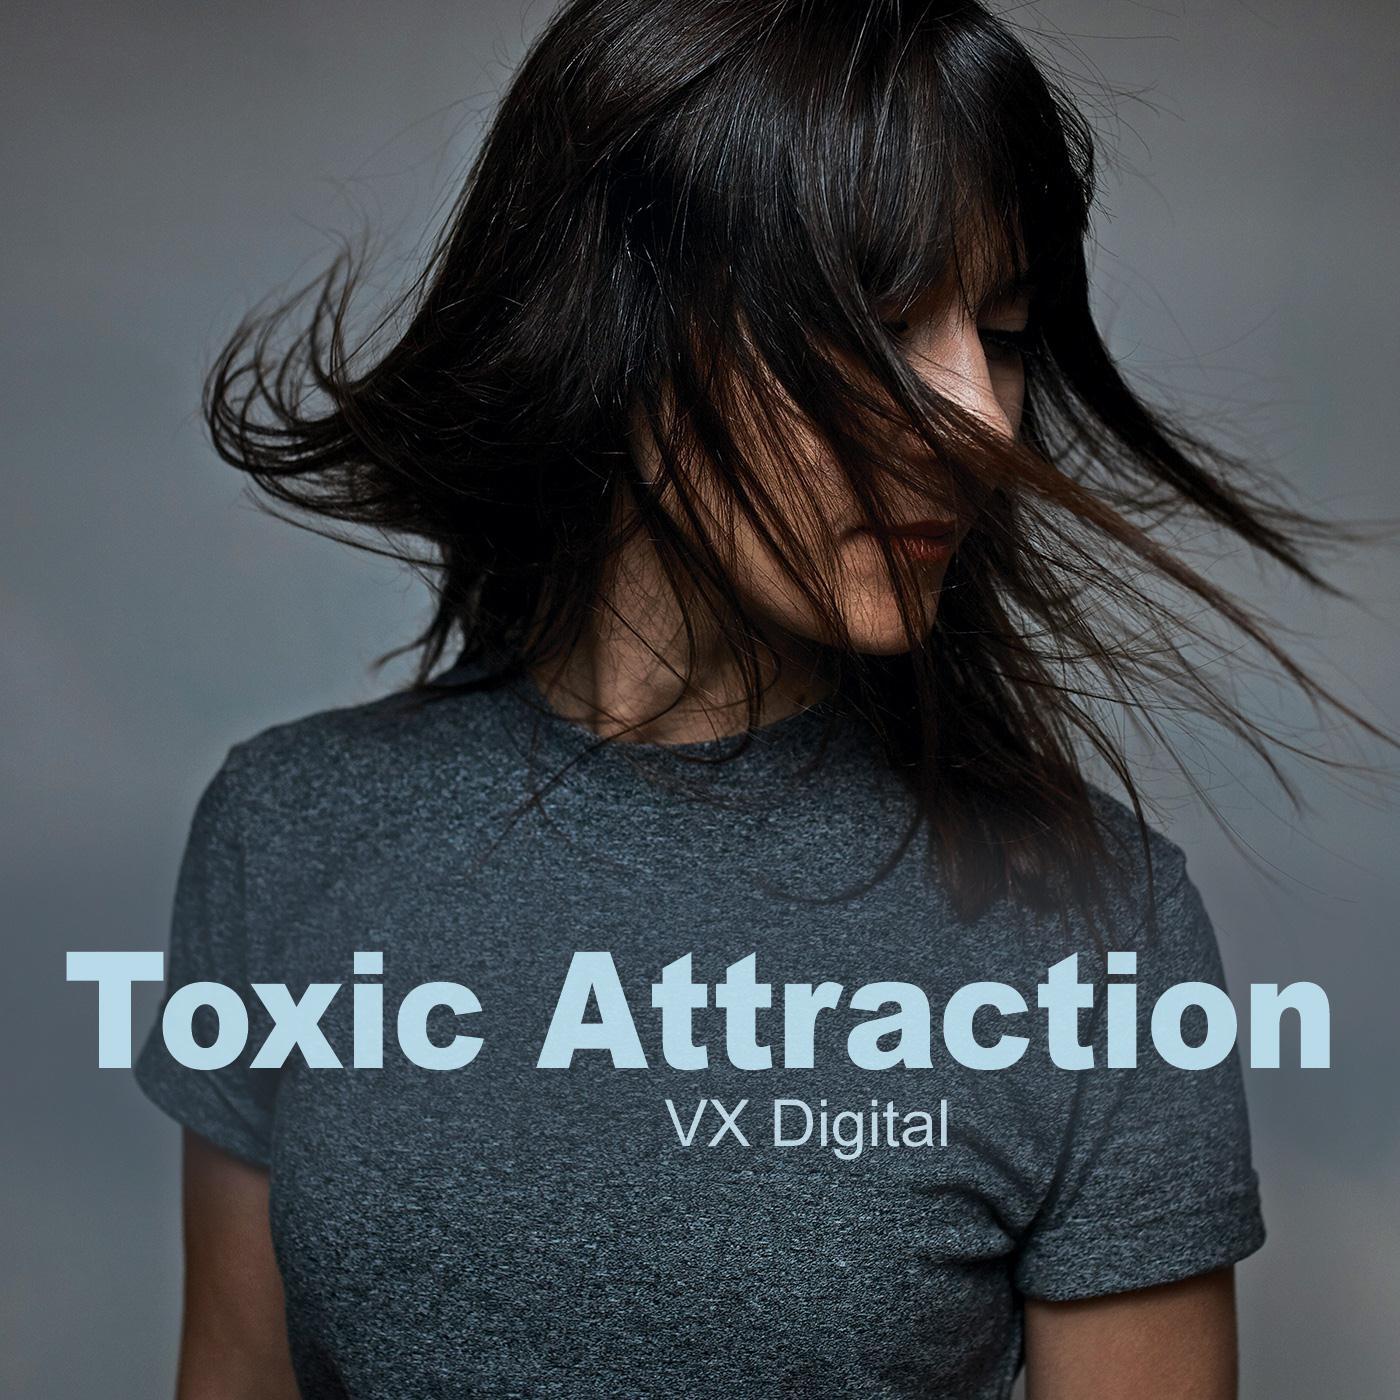 Toxic Attraction